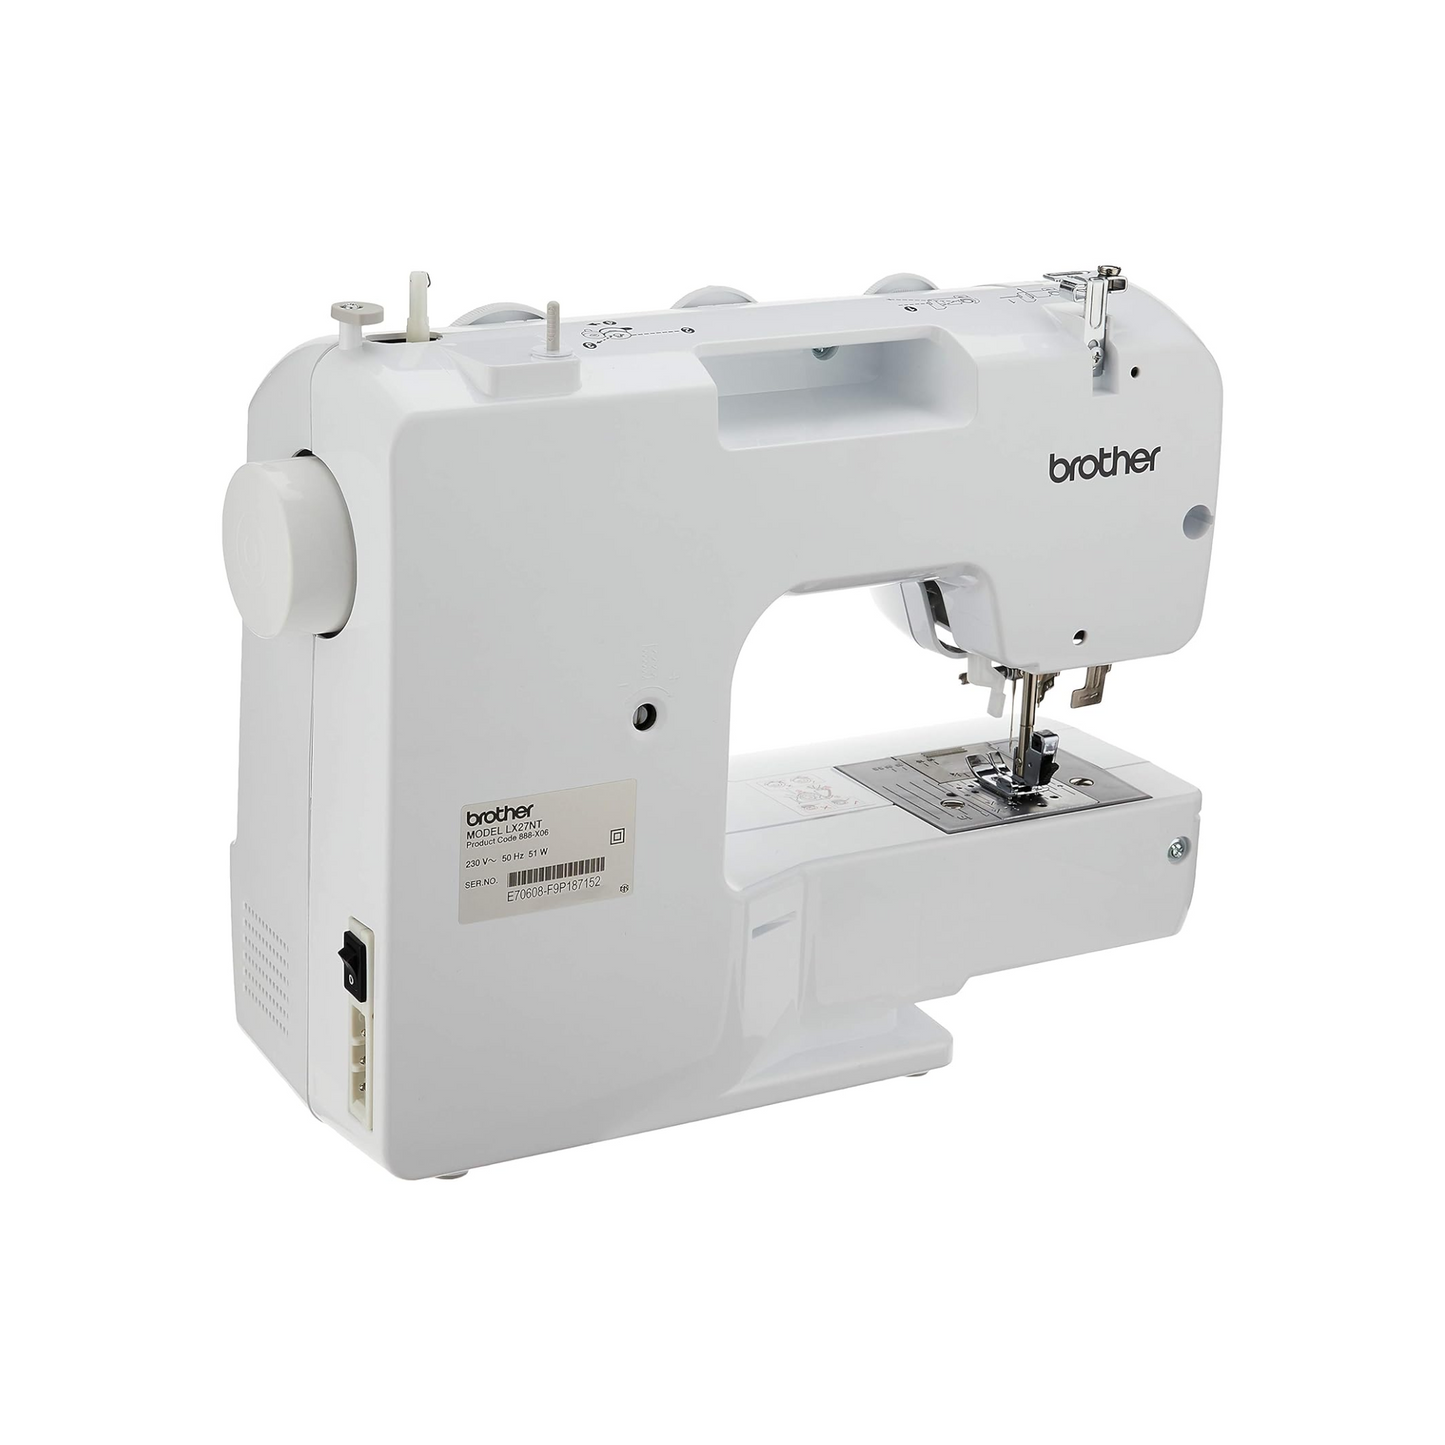 Brother LX27NT electric - Sewing machine - White - Side view